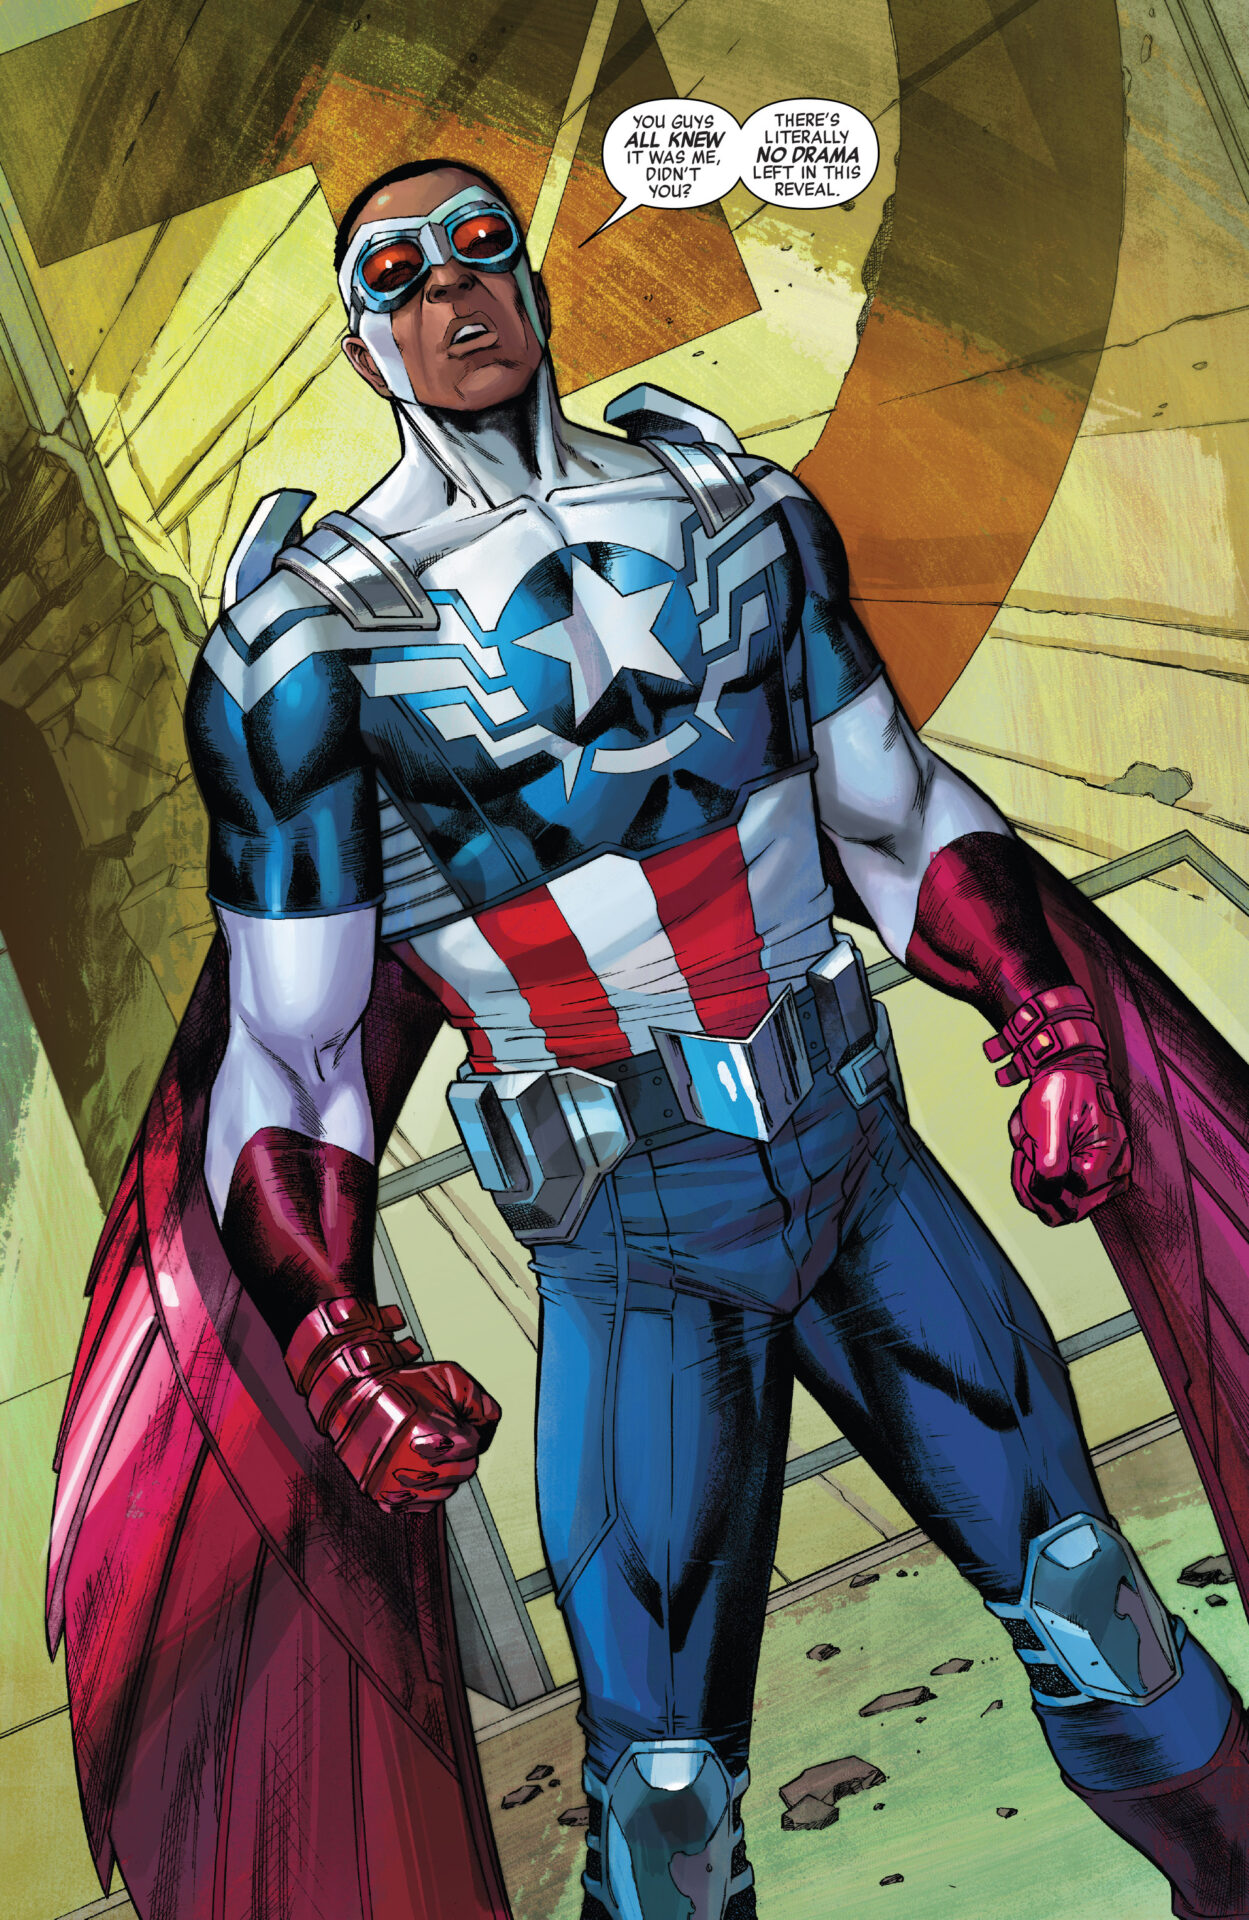 Sam Wilson makes his debut as the Star-Spangled Avengers in Captain America Vol. 7 #25 "The Tomorrow Soldier: Conclusion" (2014), Marvel Comics. Words by Rick Remender, art by Carlos Pacheco, Stuart Immonen, Mariano Taibo, Wade Von Grawbadger, Dean White, Veronica Gandini, and Marte Gracia.